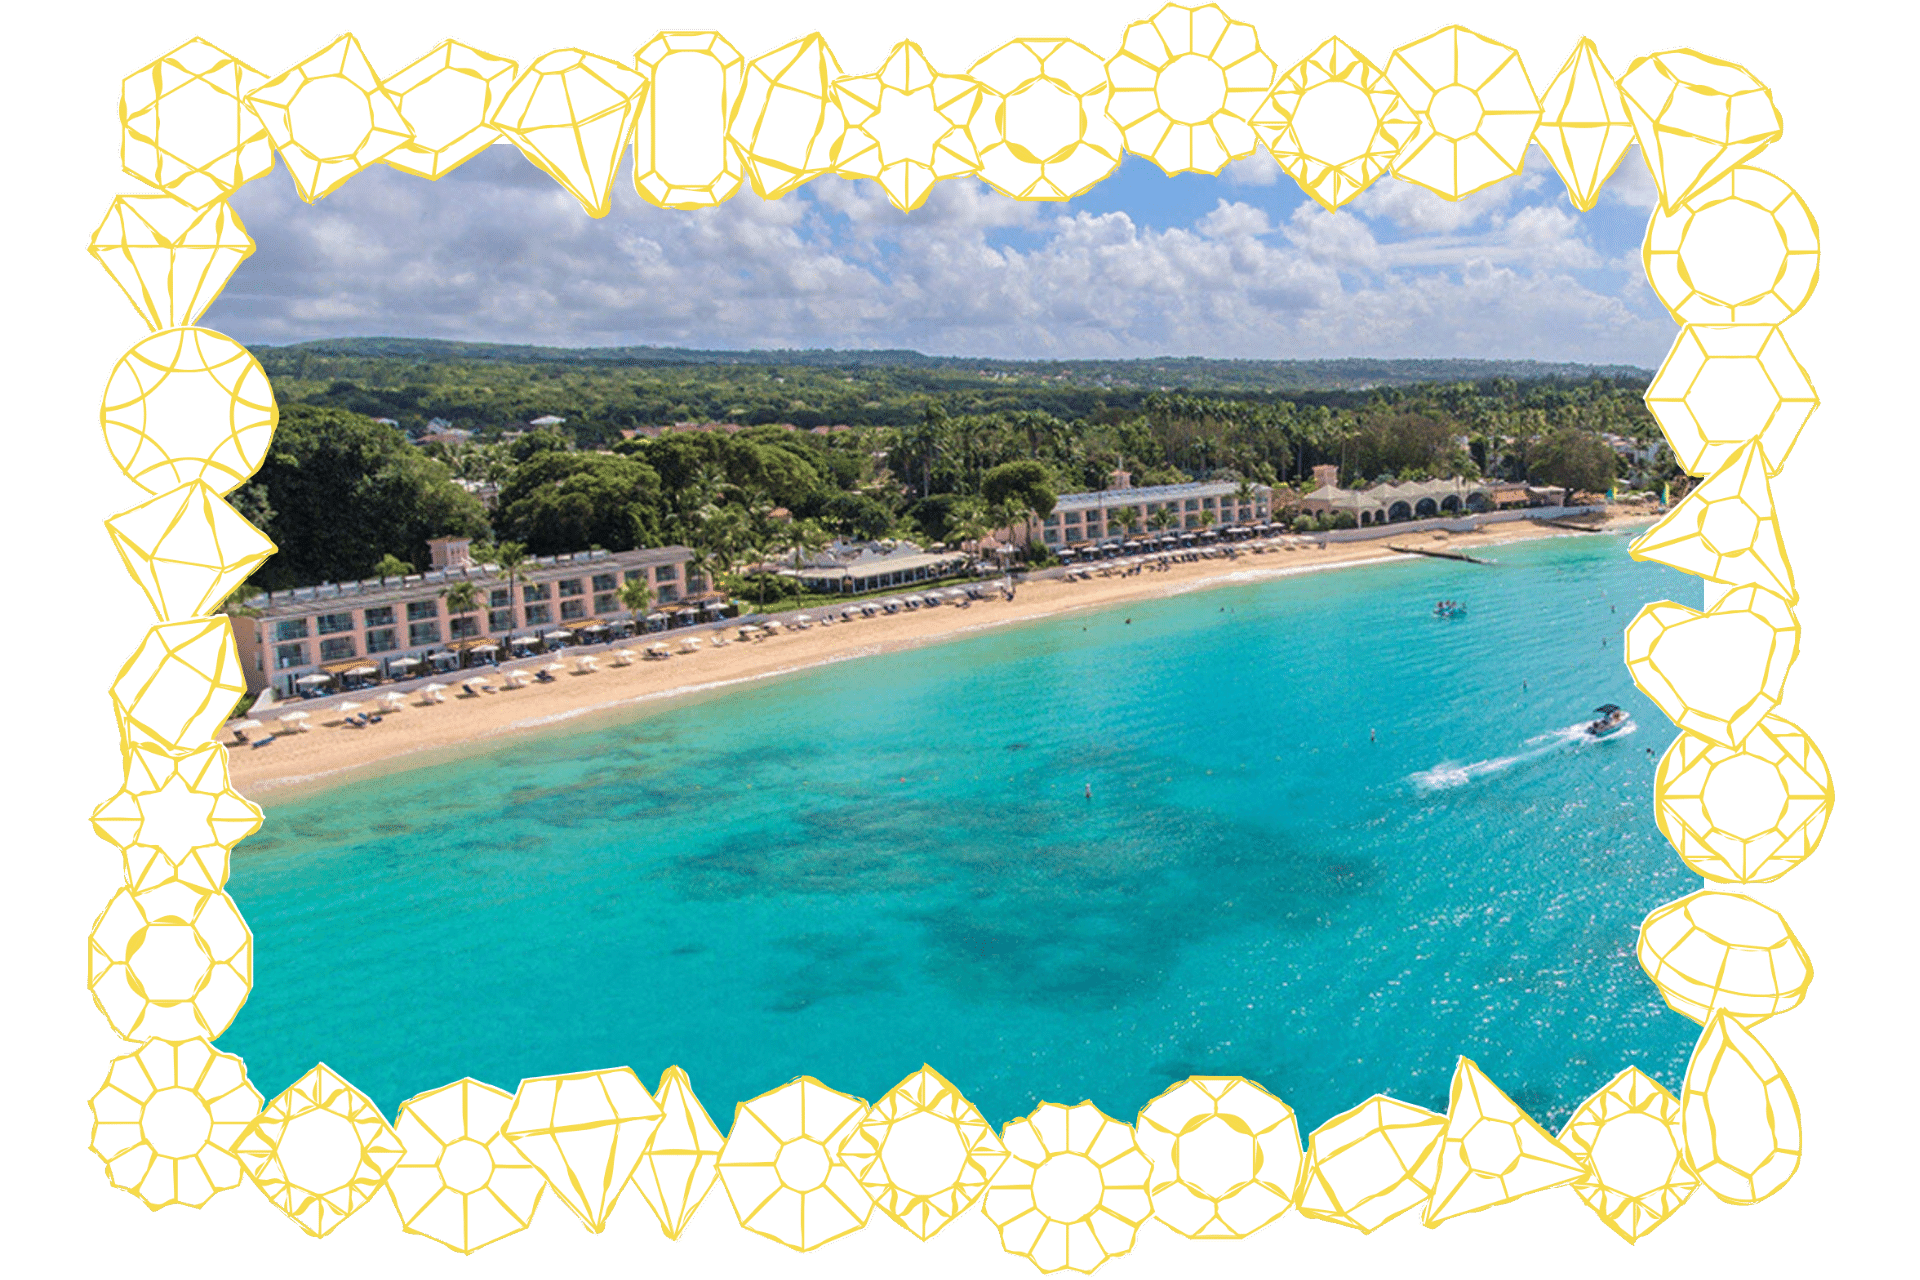 The Fairmont Royal Pavilion is a luxury hotel in Barbados: an exterior shot of the hotel which sits directly on the beach.